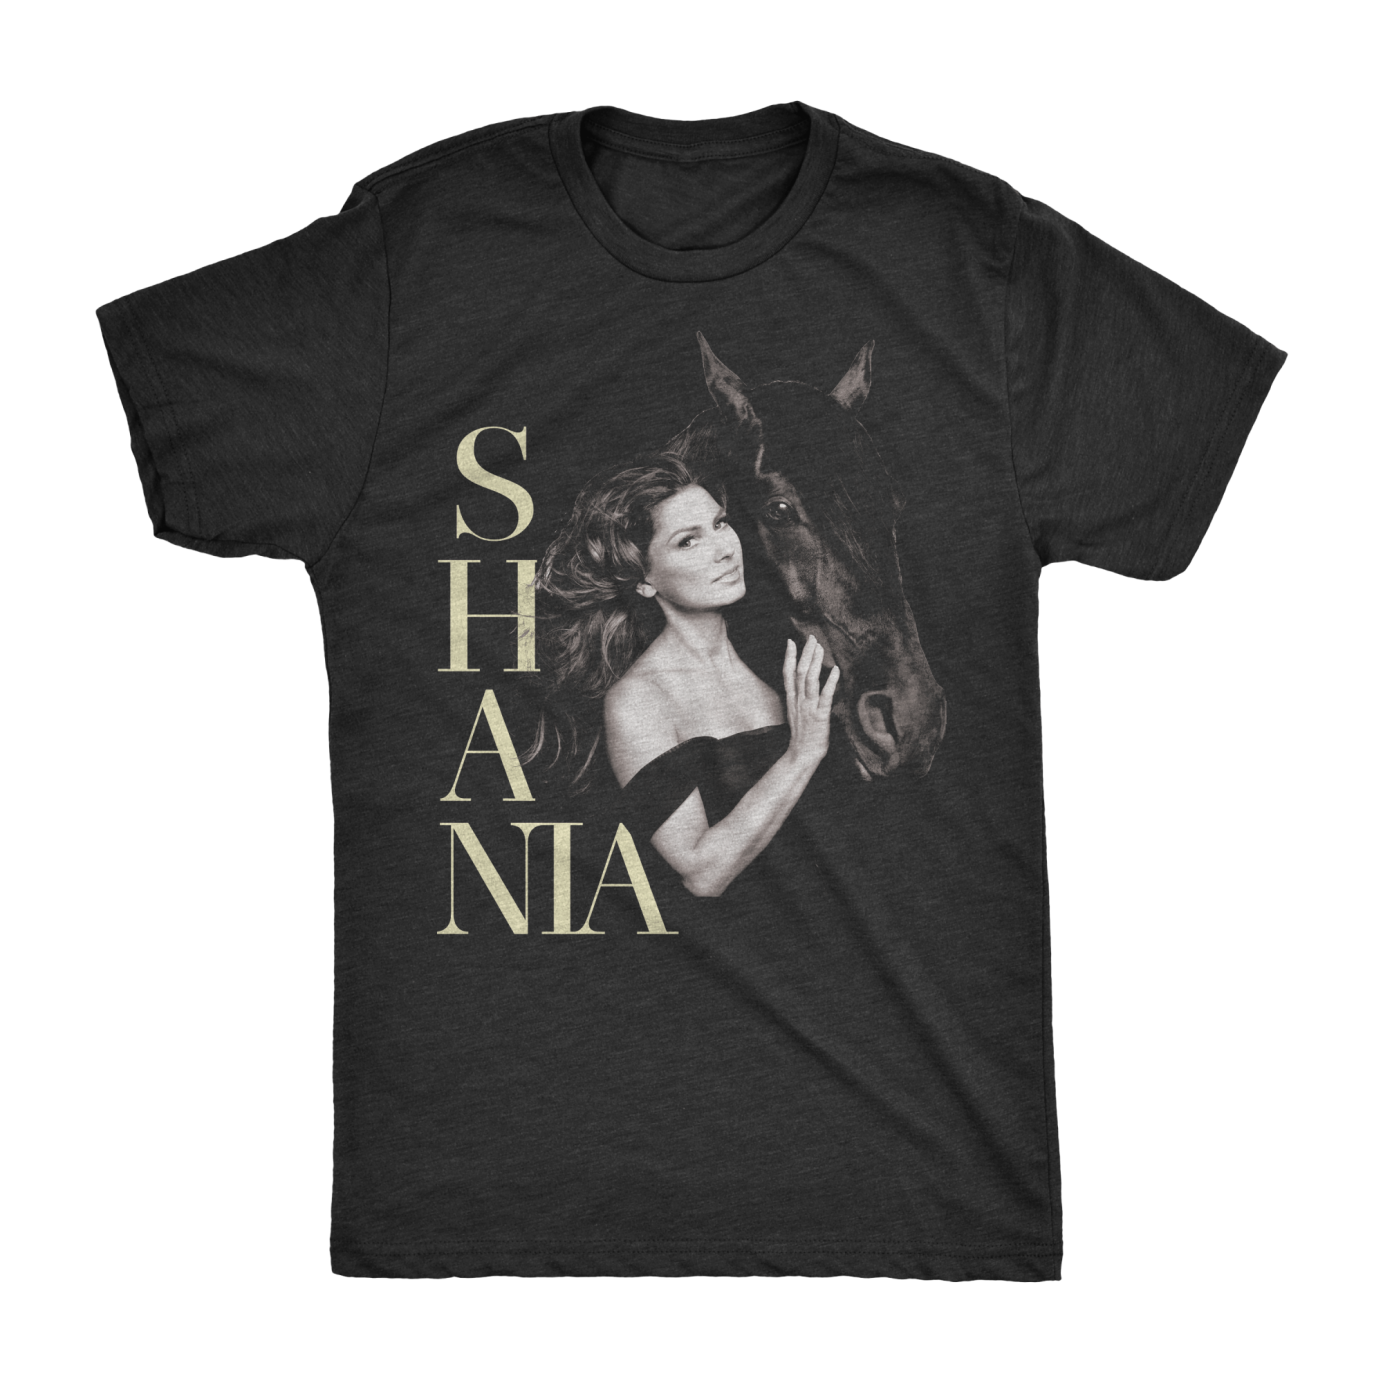 Graphic design for Shania Twain by dxvidesigns